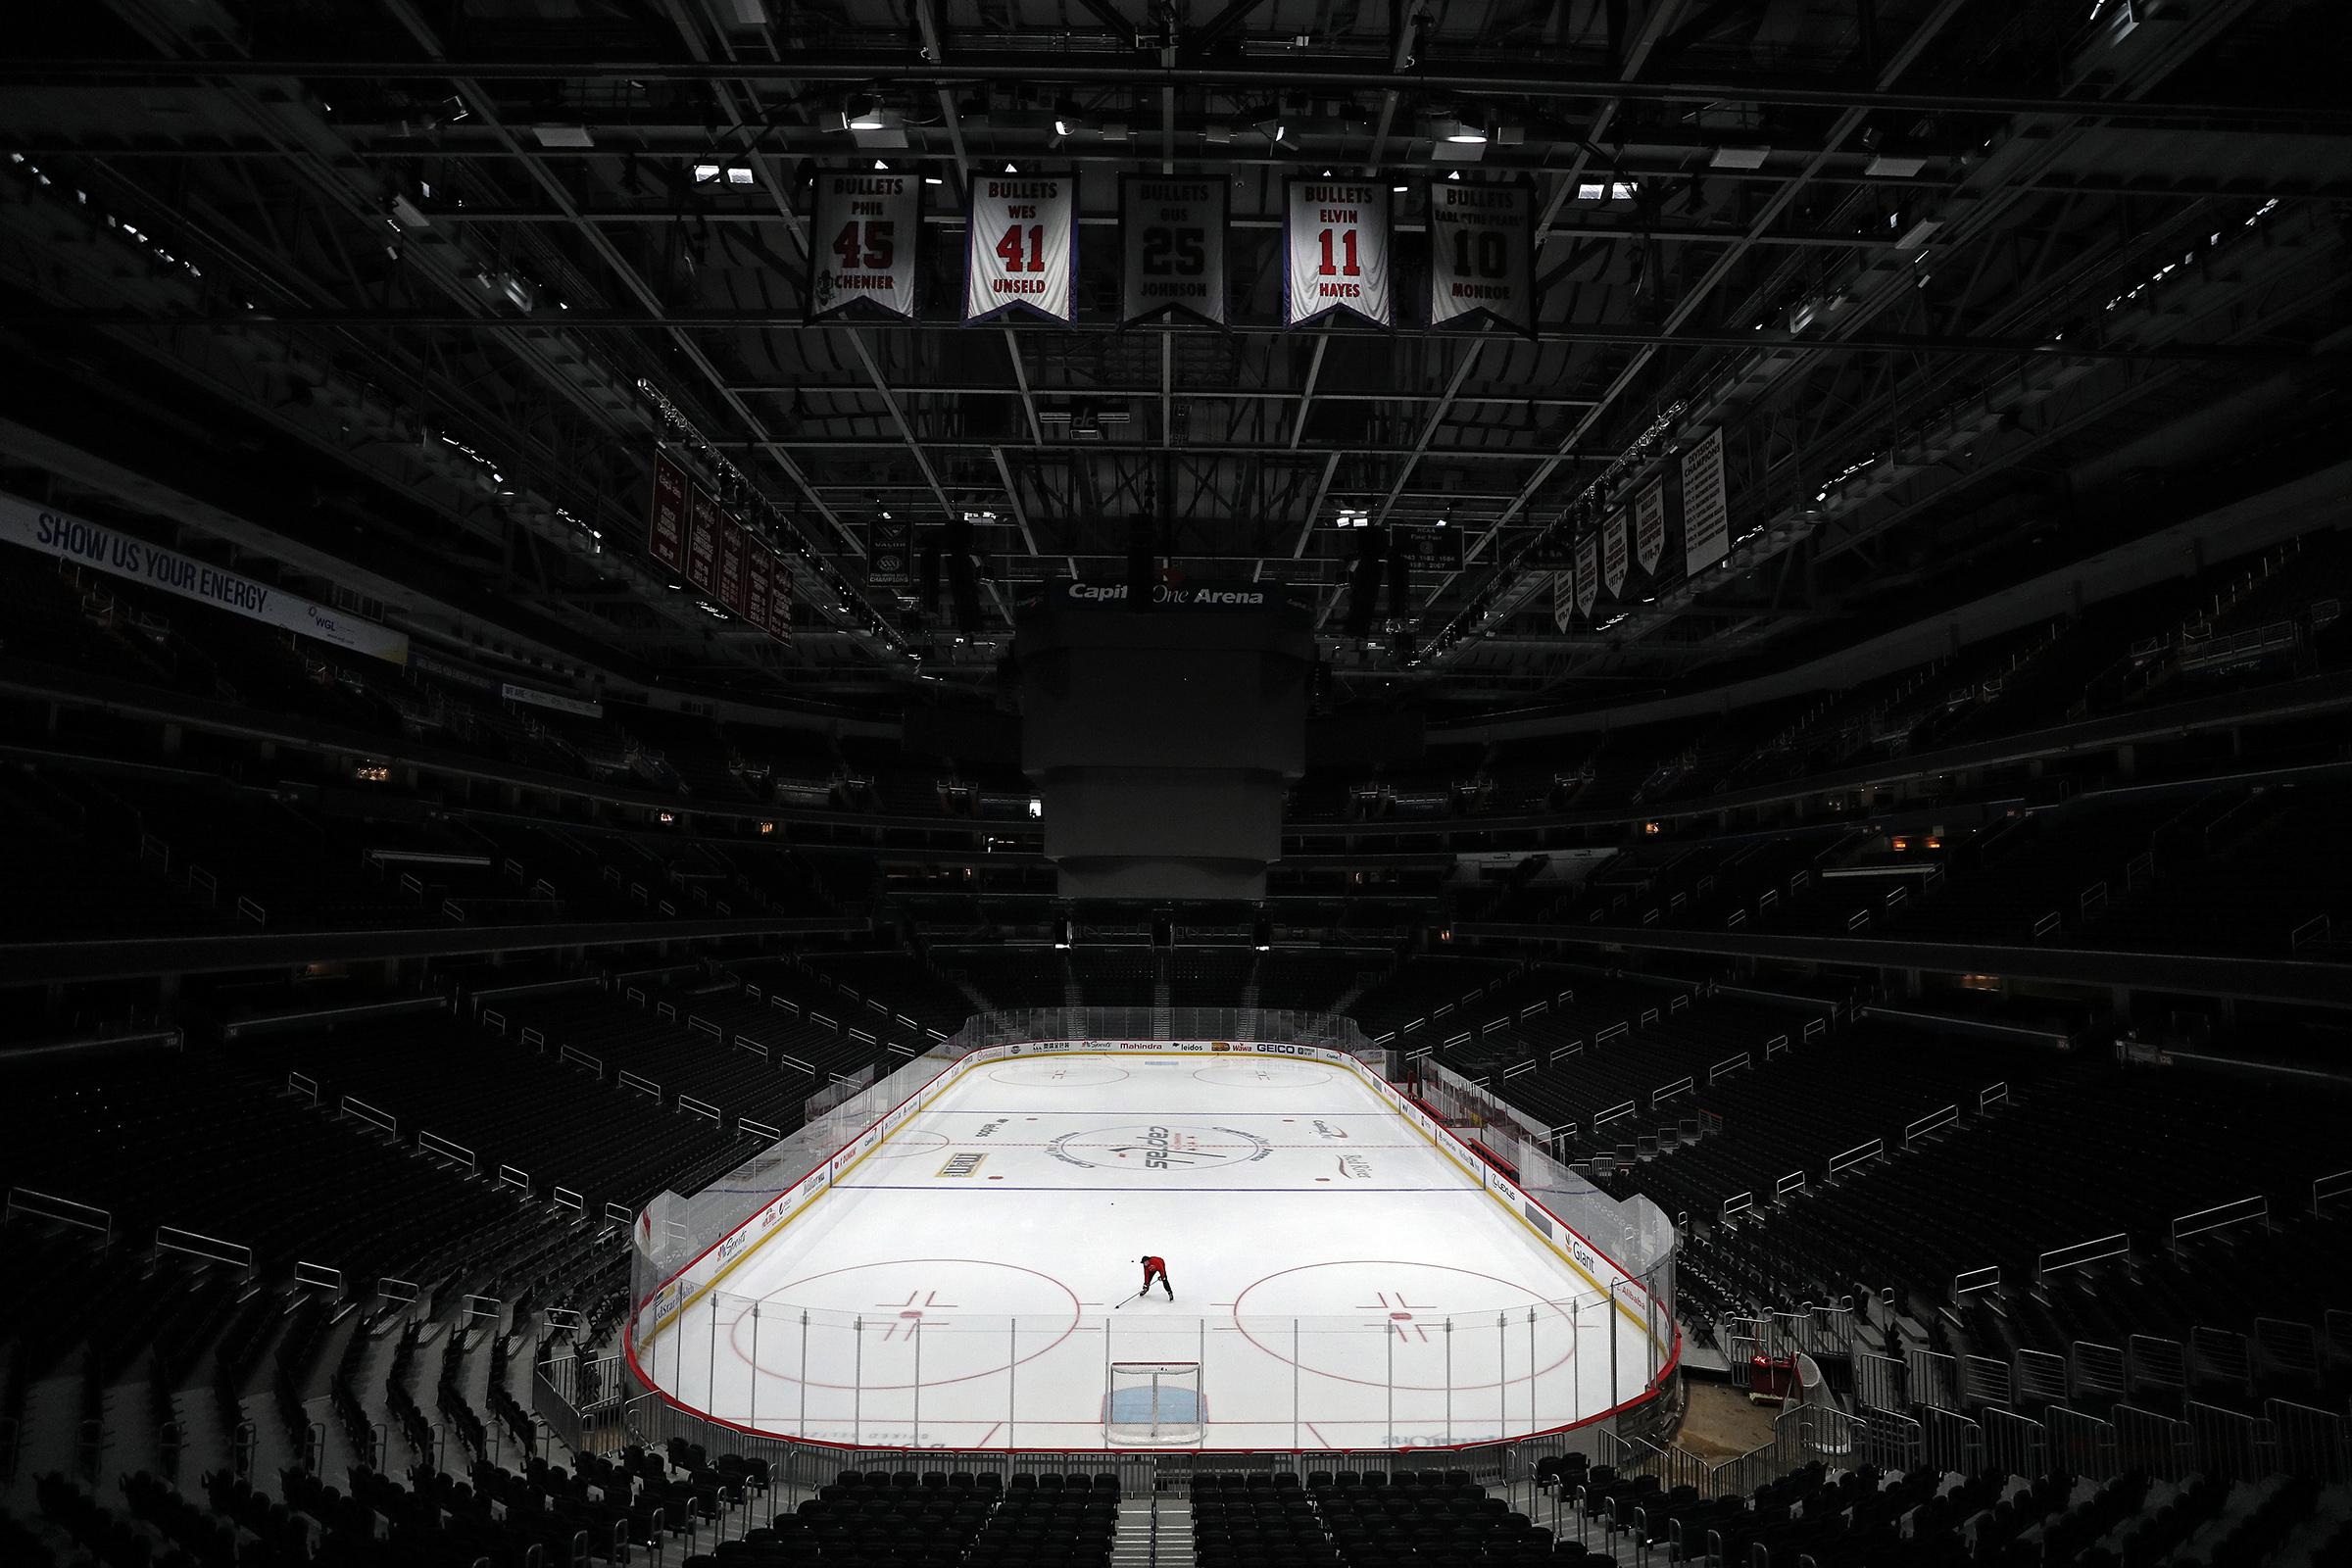 Sam Hess, Operations with Monumental Sports & Entertainment, skates alone prior Detroit Red Wings playing against the Washington Capitals at Capital One Arena on March 12 in Washington, DC. (Patrick Smith—Getty Images)